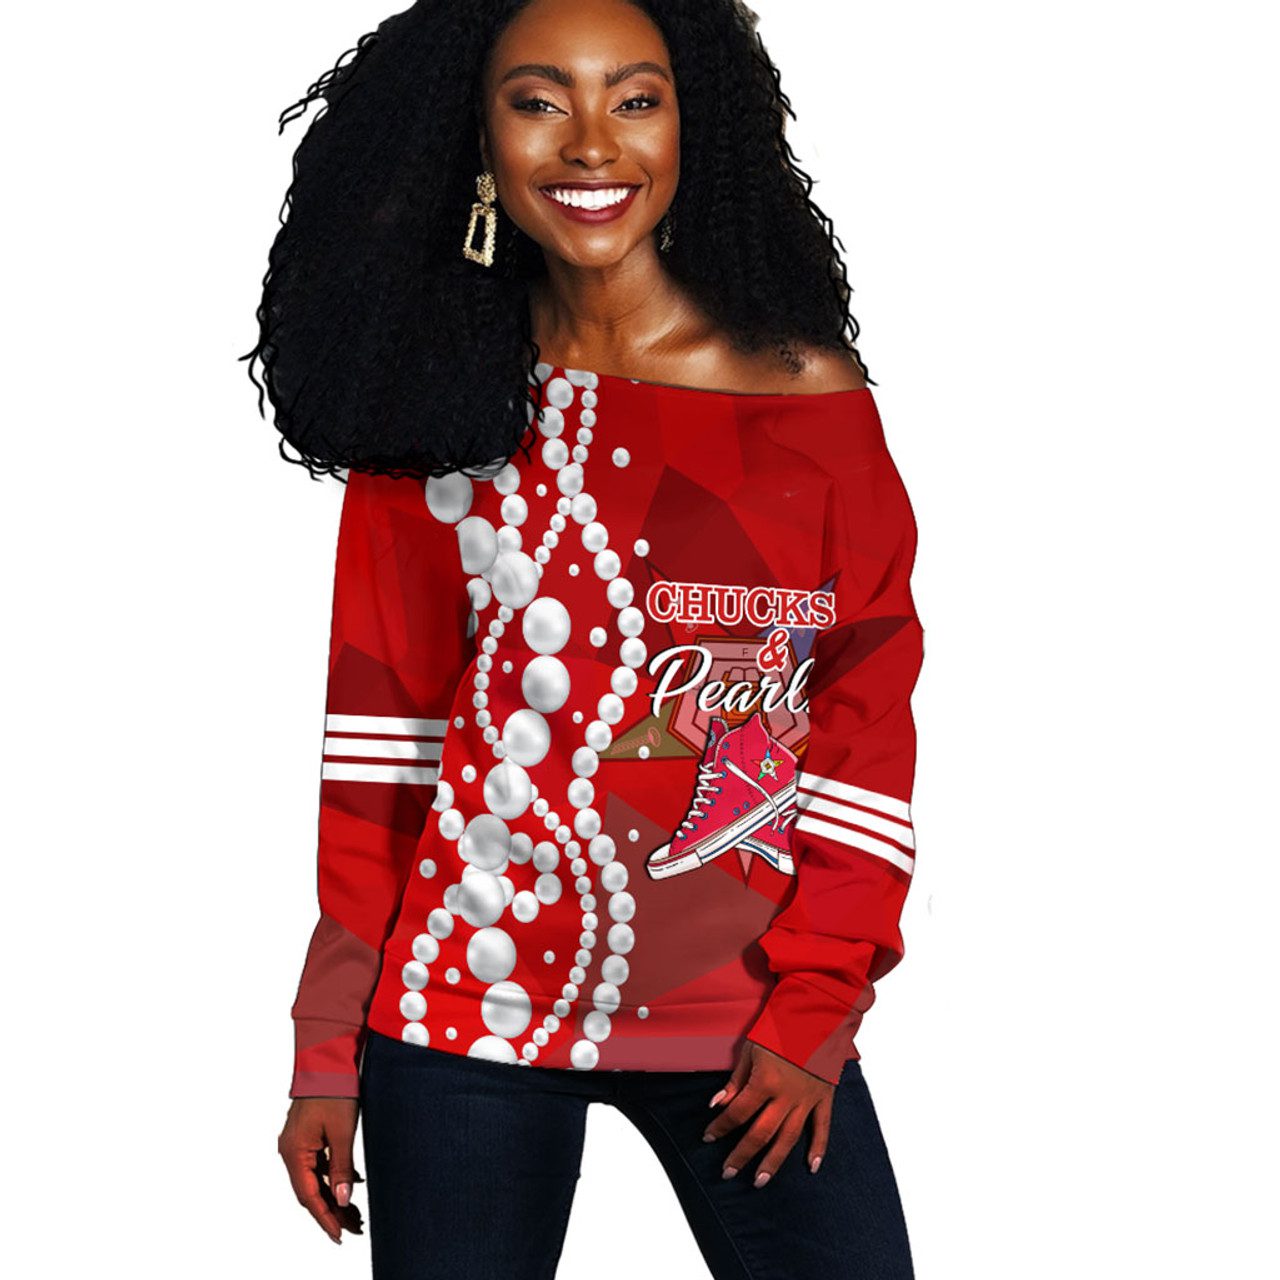 Order of the Eastern Star Off Shoulder Sweatshirt Greek Life Chuck And Pearls